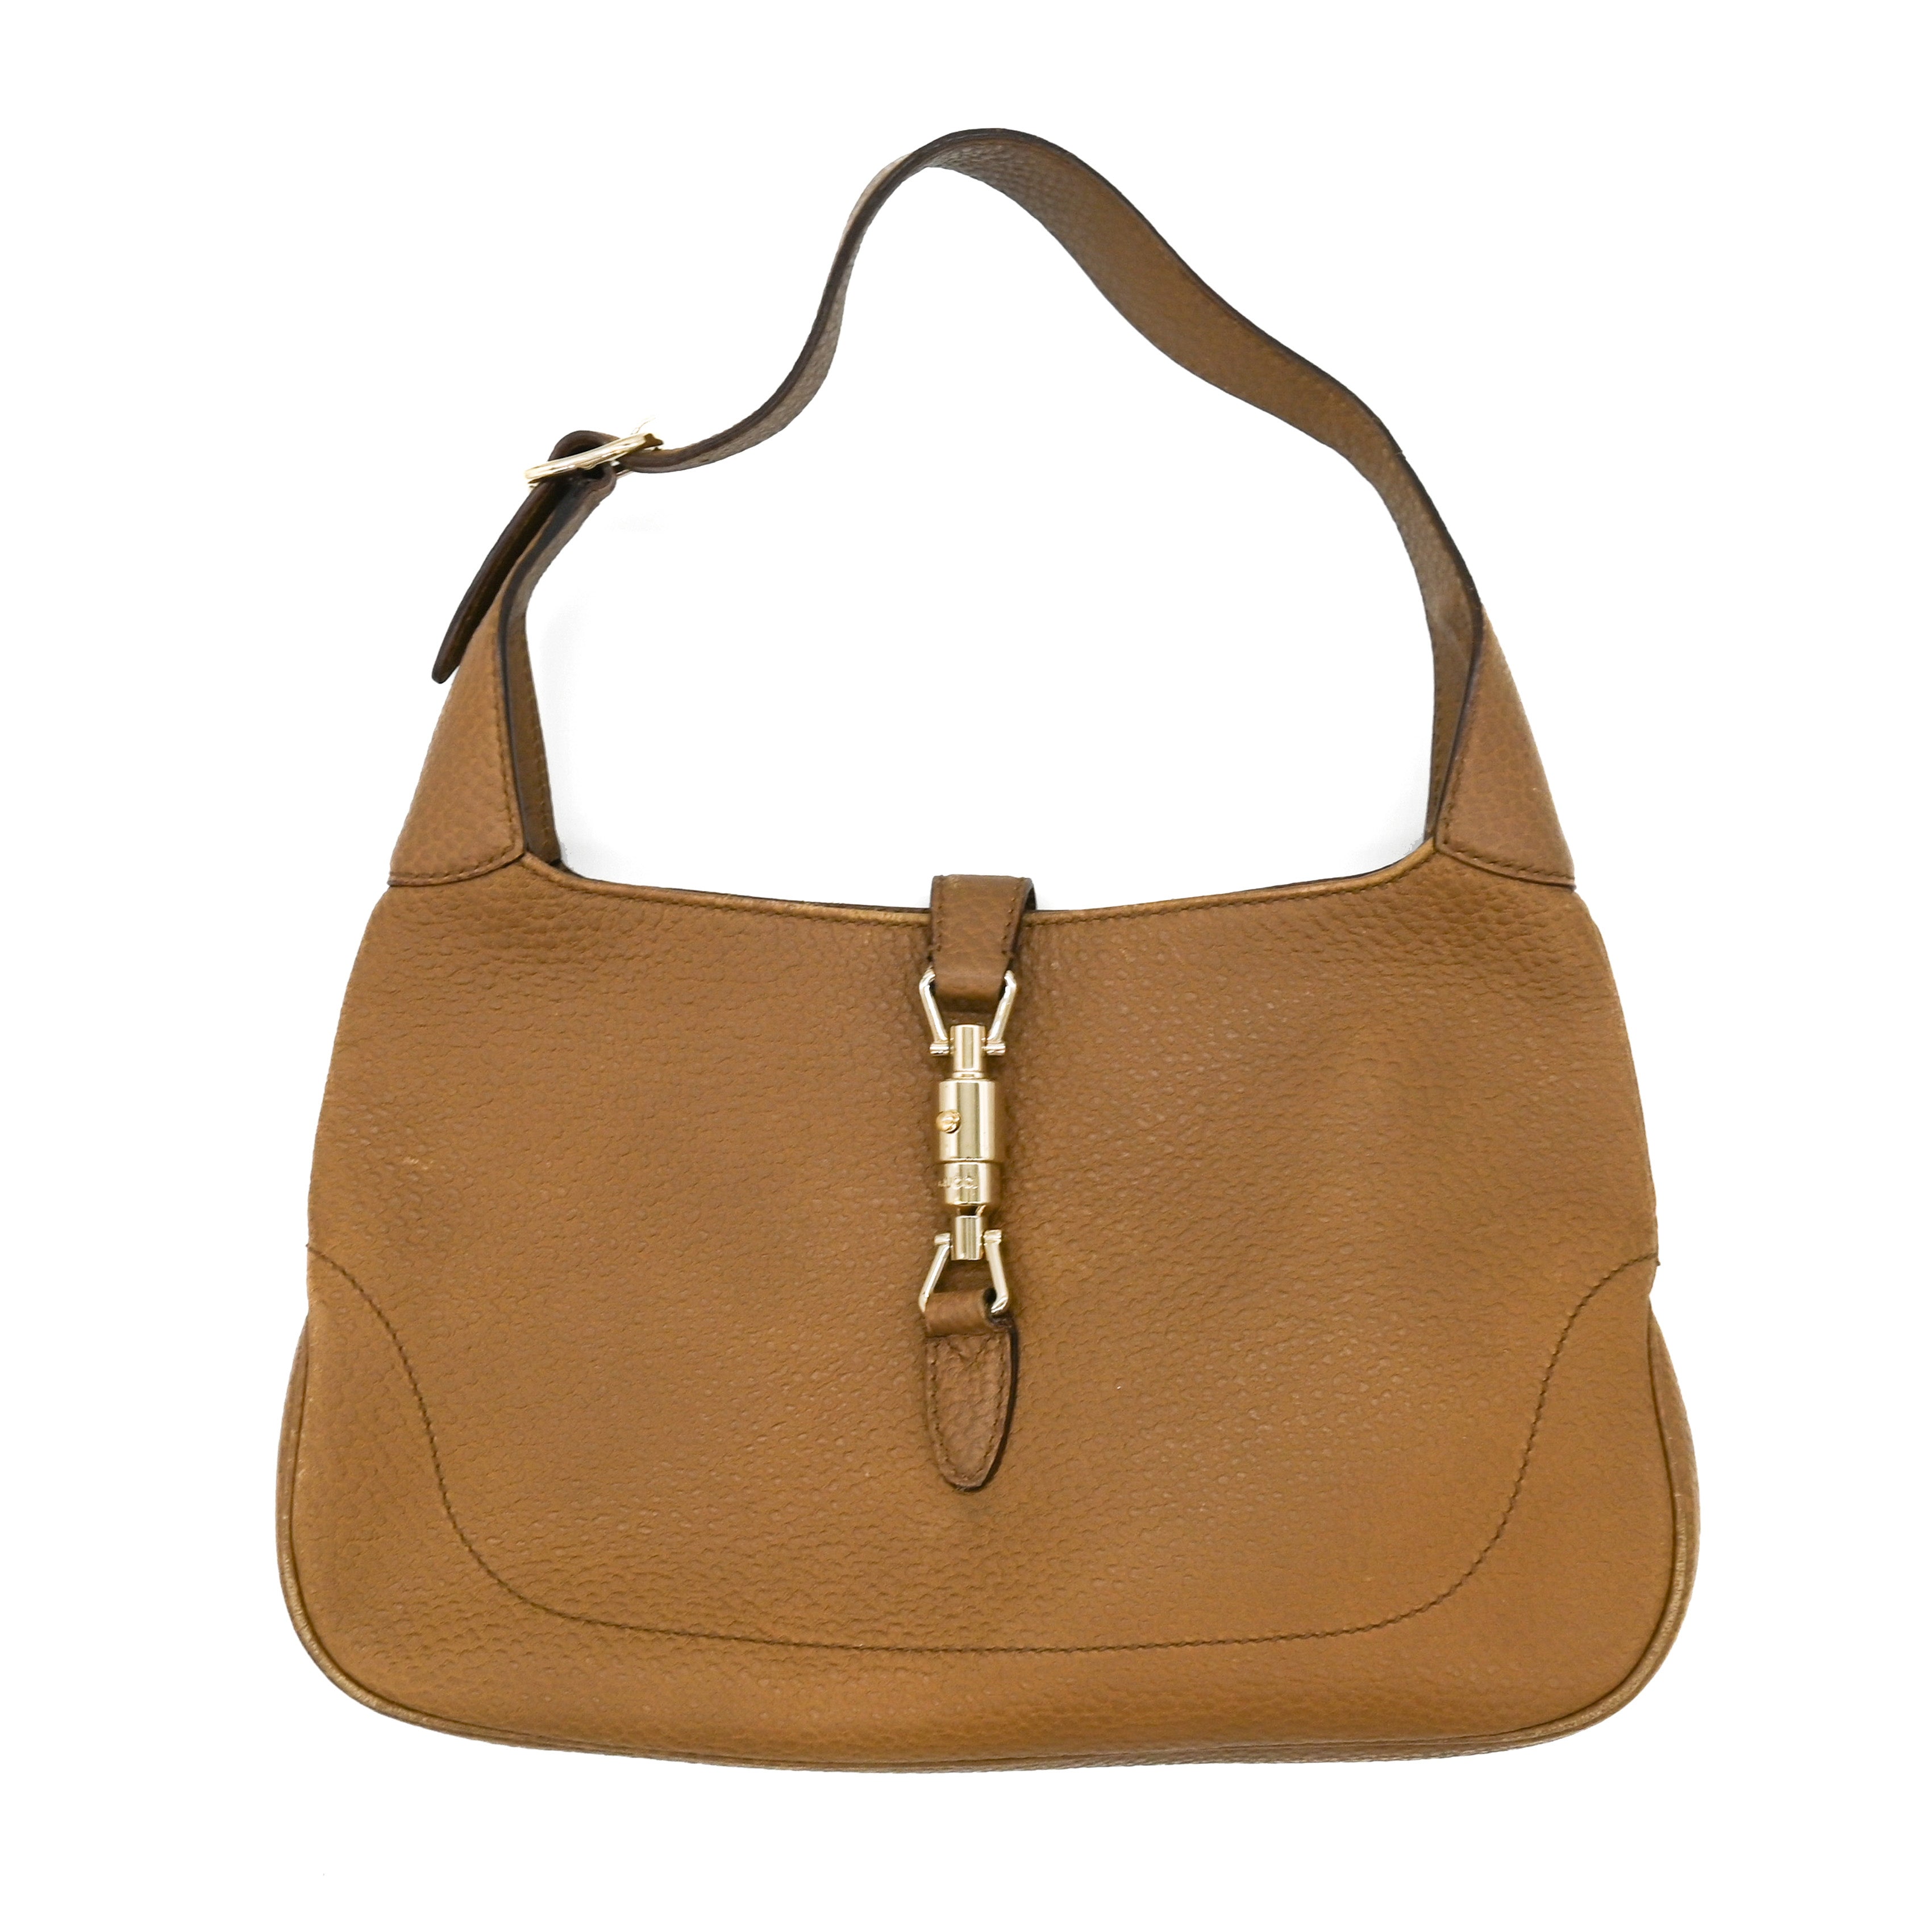 GUCCI Gucci Jackie Small Vintage Calfskin Leather Hobo Bag in Tan - Vault 55